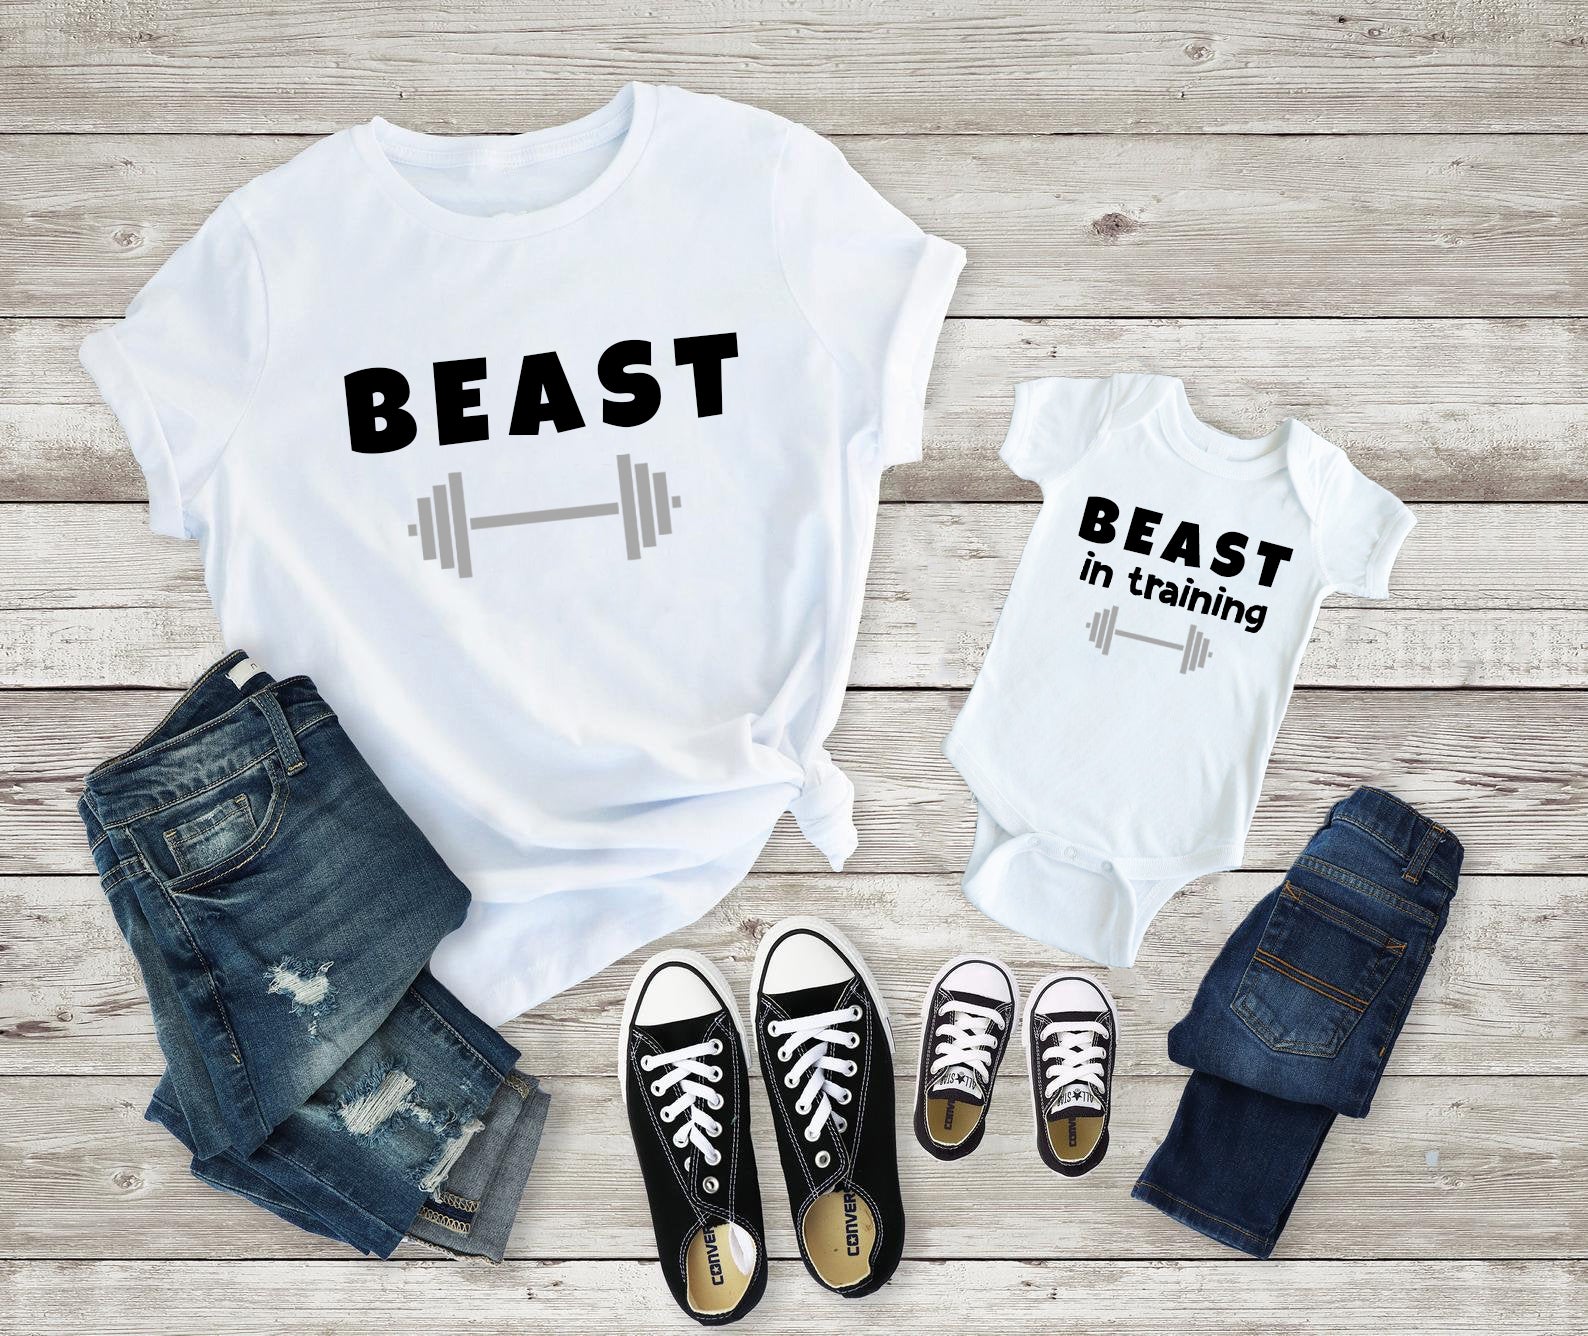 Texas Tees, Matching Father Daughter Shirts, Dad and Daughter Matching  Outfits, Pink Beast in Training & Mens Beast 